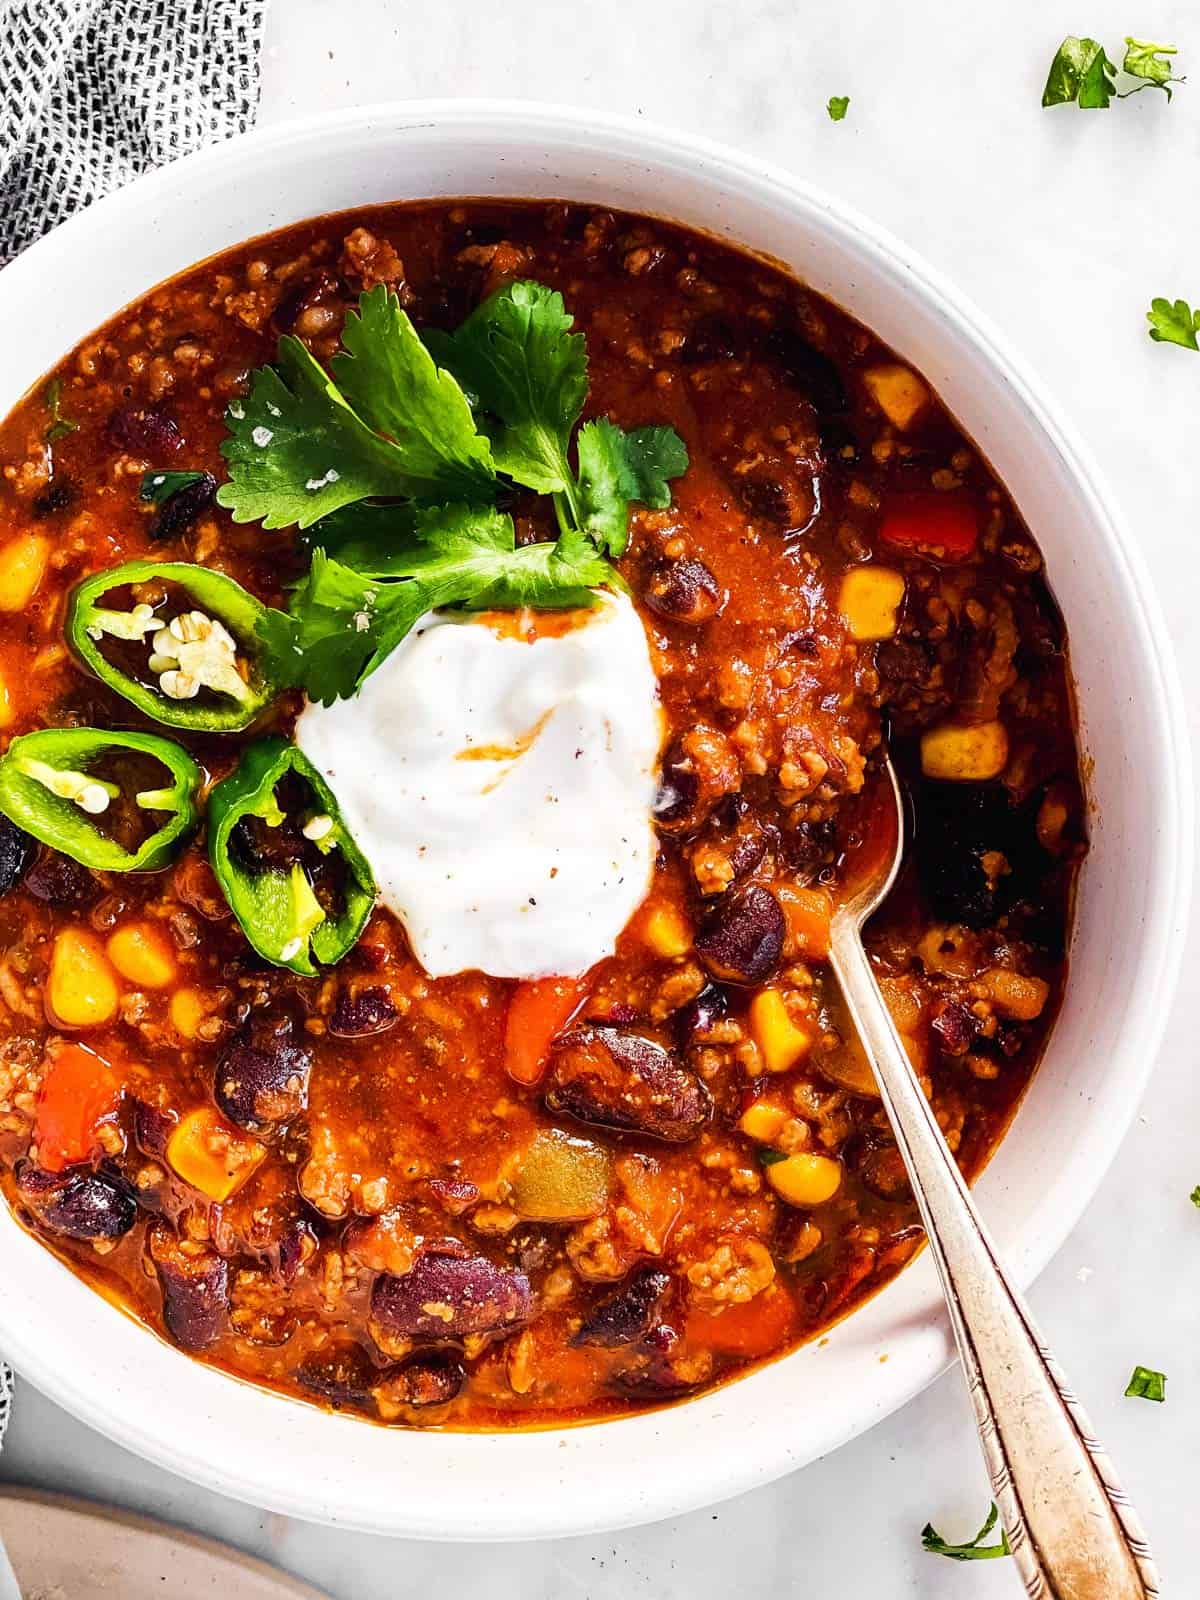 https://www.savorynothings.com/wp-content/uploads/2017/09/slow-cooker-chili-image-11.jpg